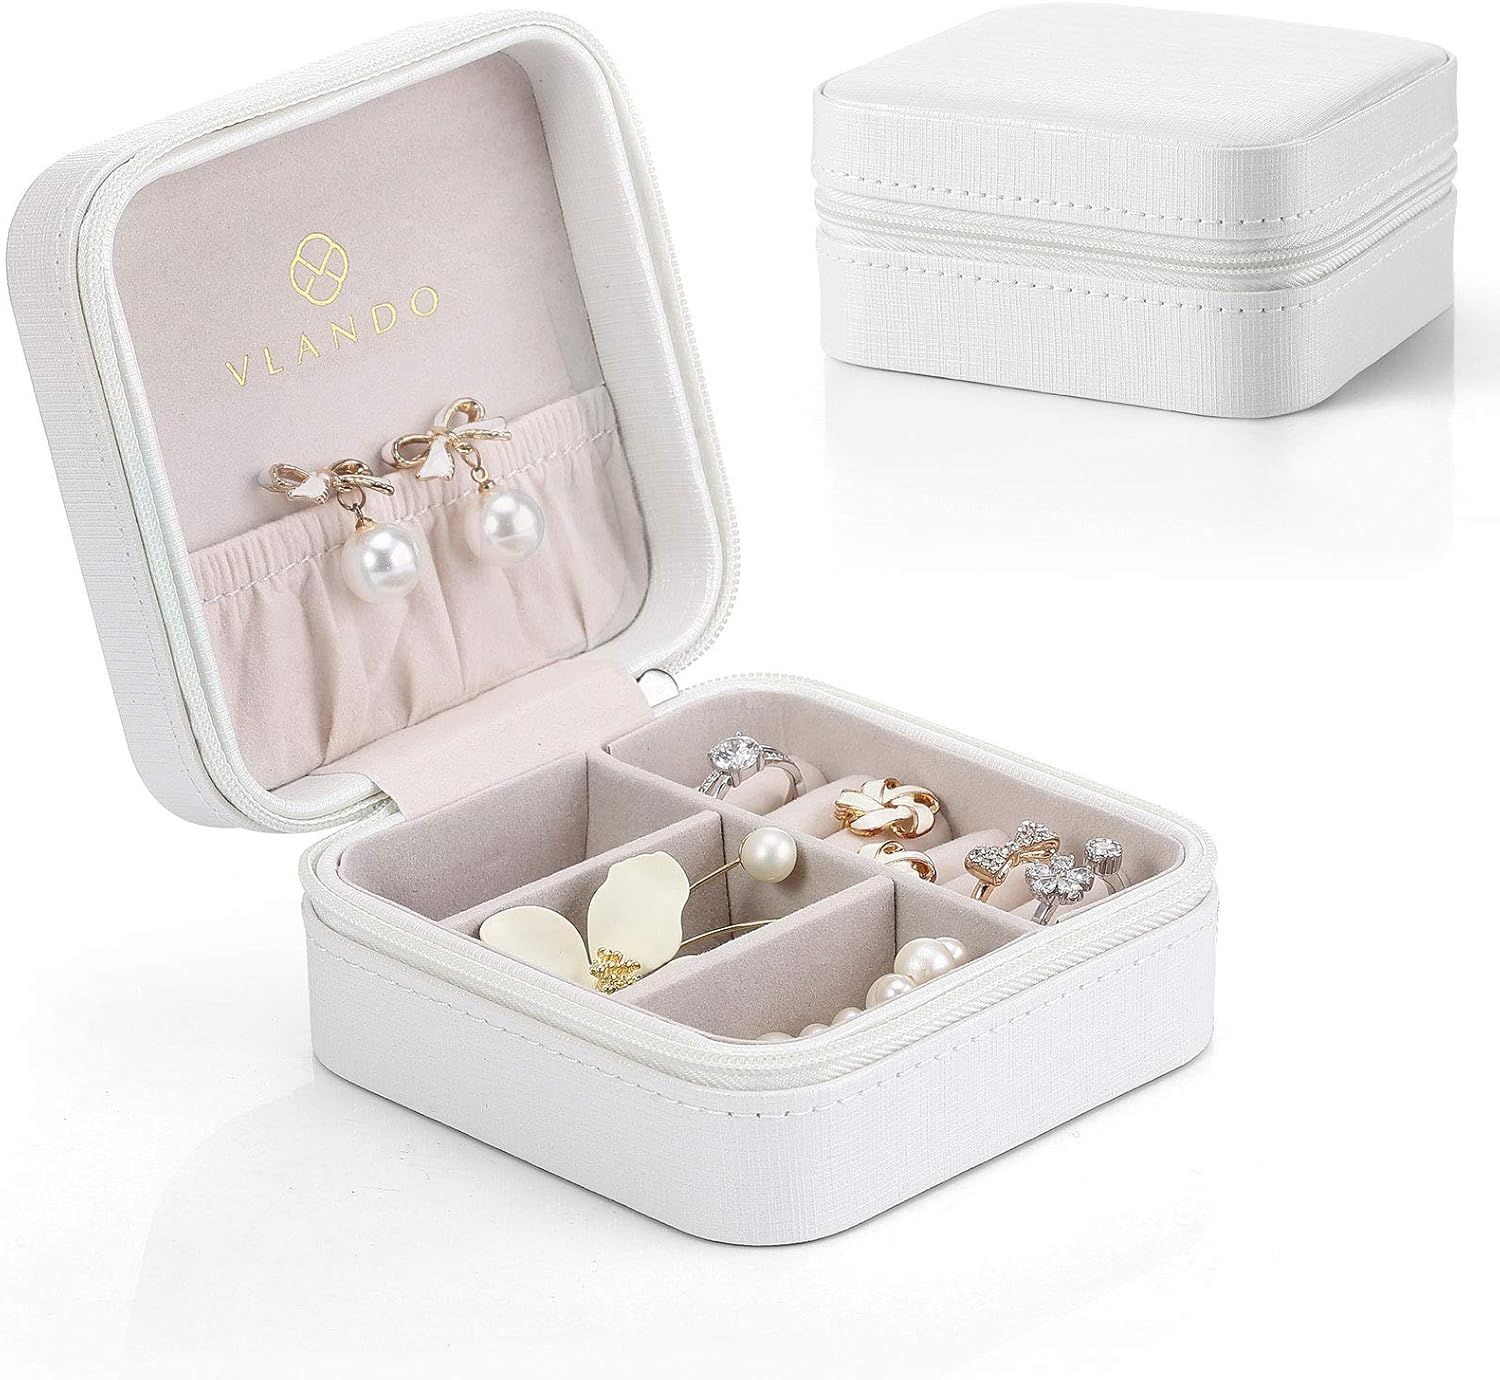 Vlando Macaron Small Jewelry Box, Travel Storage Case for Rings and Earrings (White) | Amazon (US)